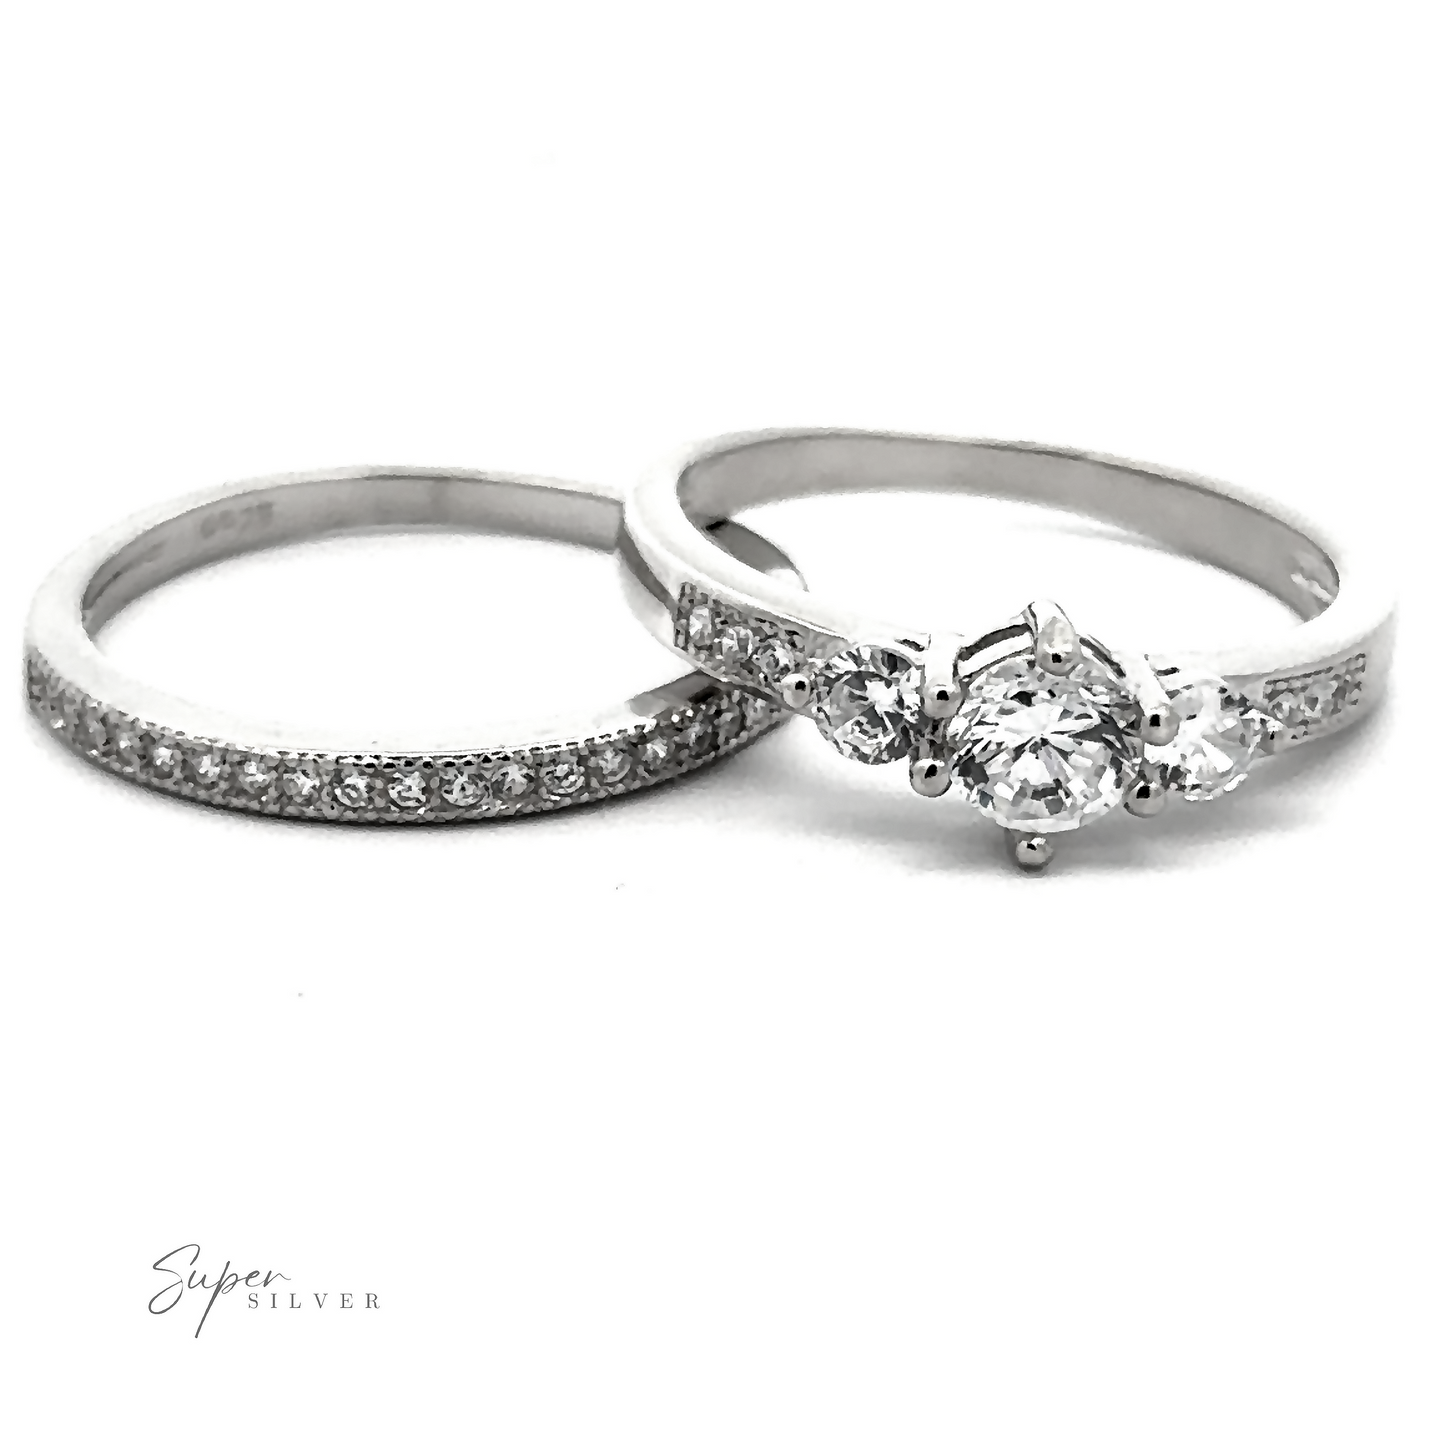 Two silver rings, one showcasing a row of small, high-quality cubic zirconia stones and another featuring a central round diamond flanked by two smaller diamonds, displayed on a white background. "Round Cubic Zirconia Wedding Band Set" is written in the bottom left corner.